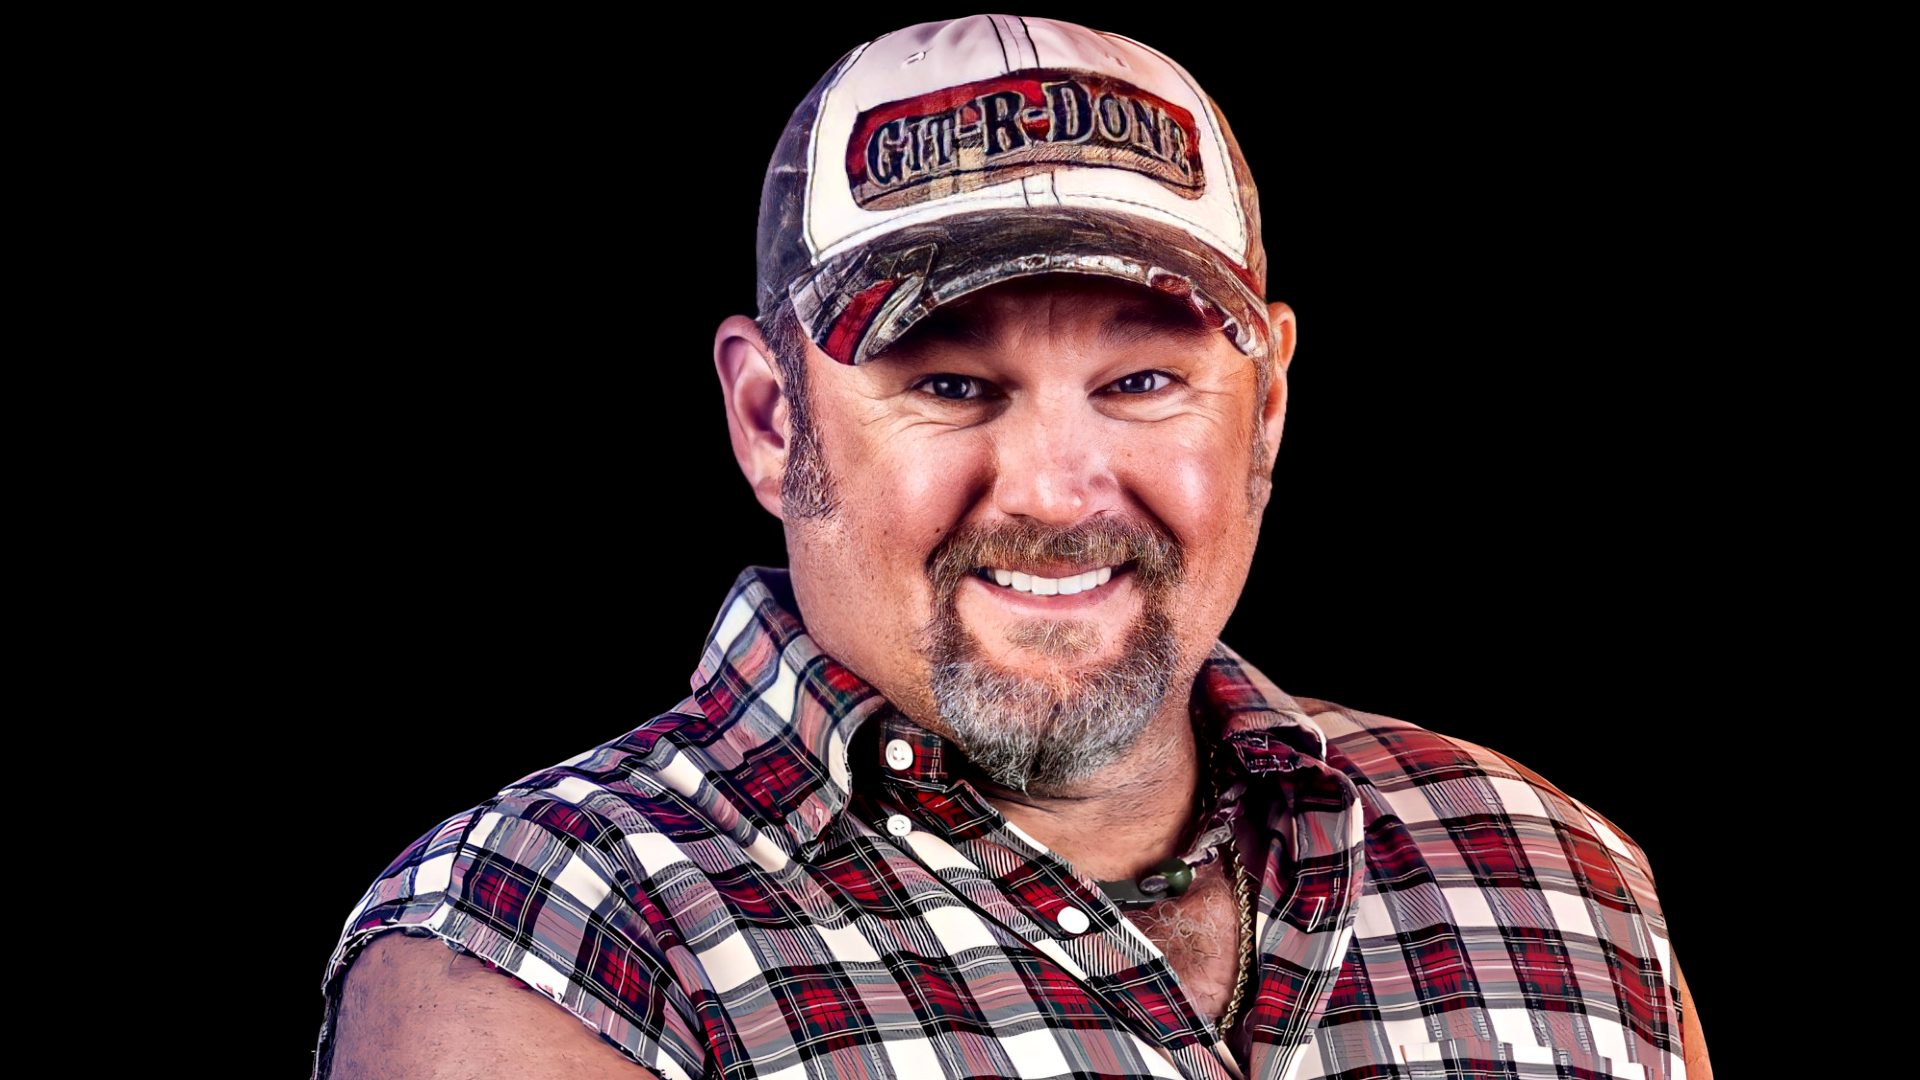 larry cable guy house